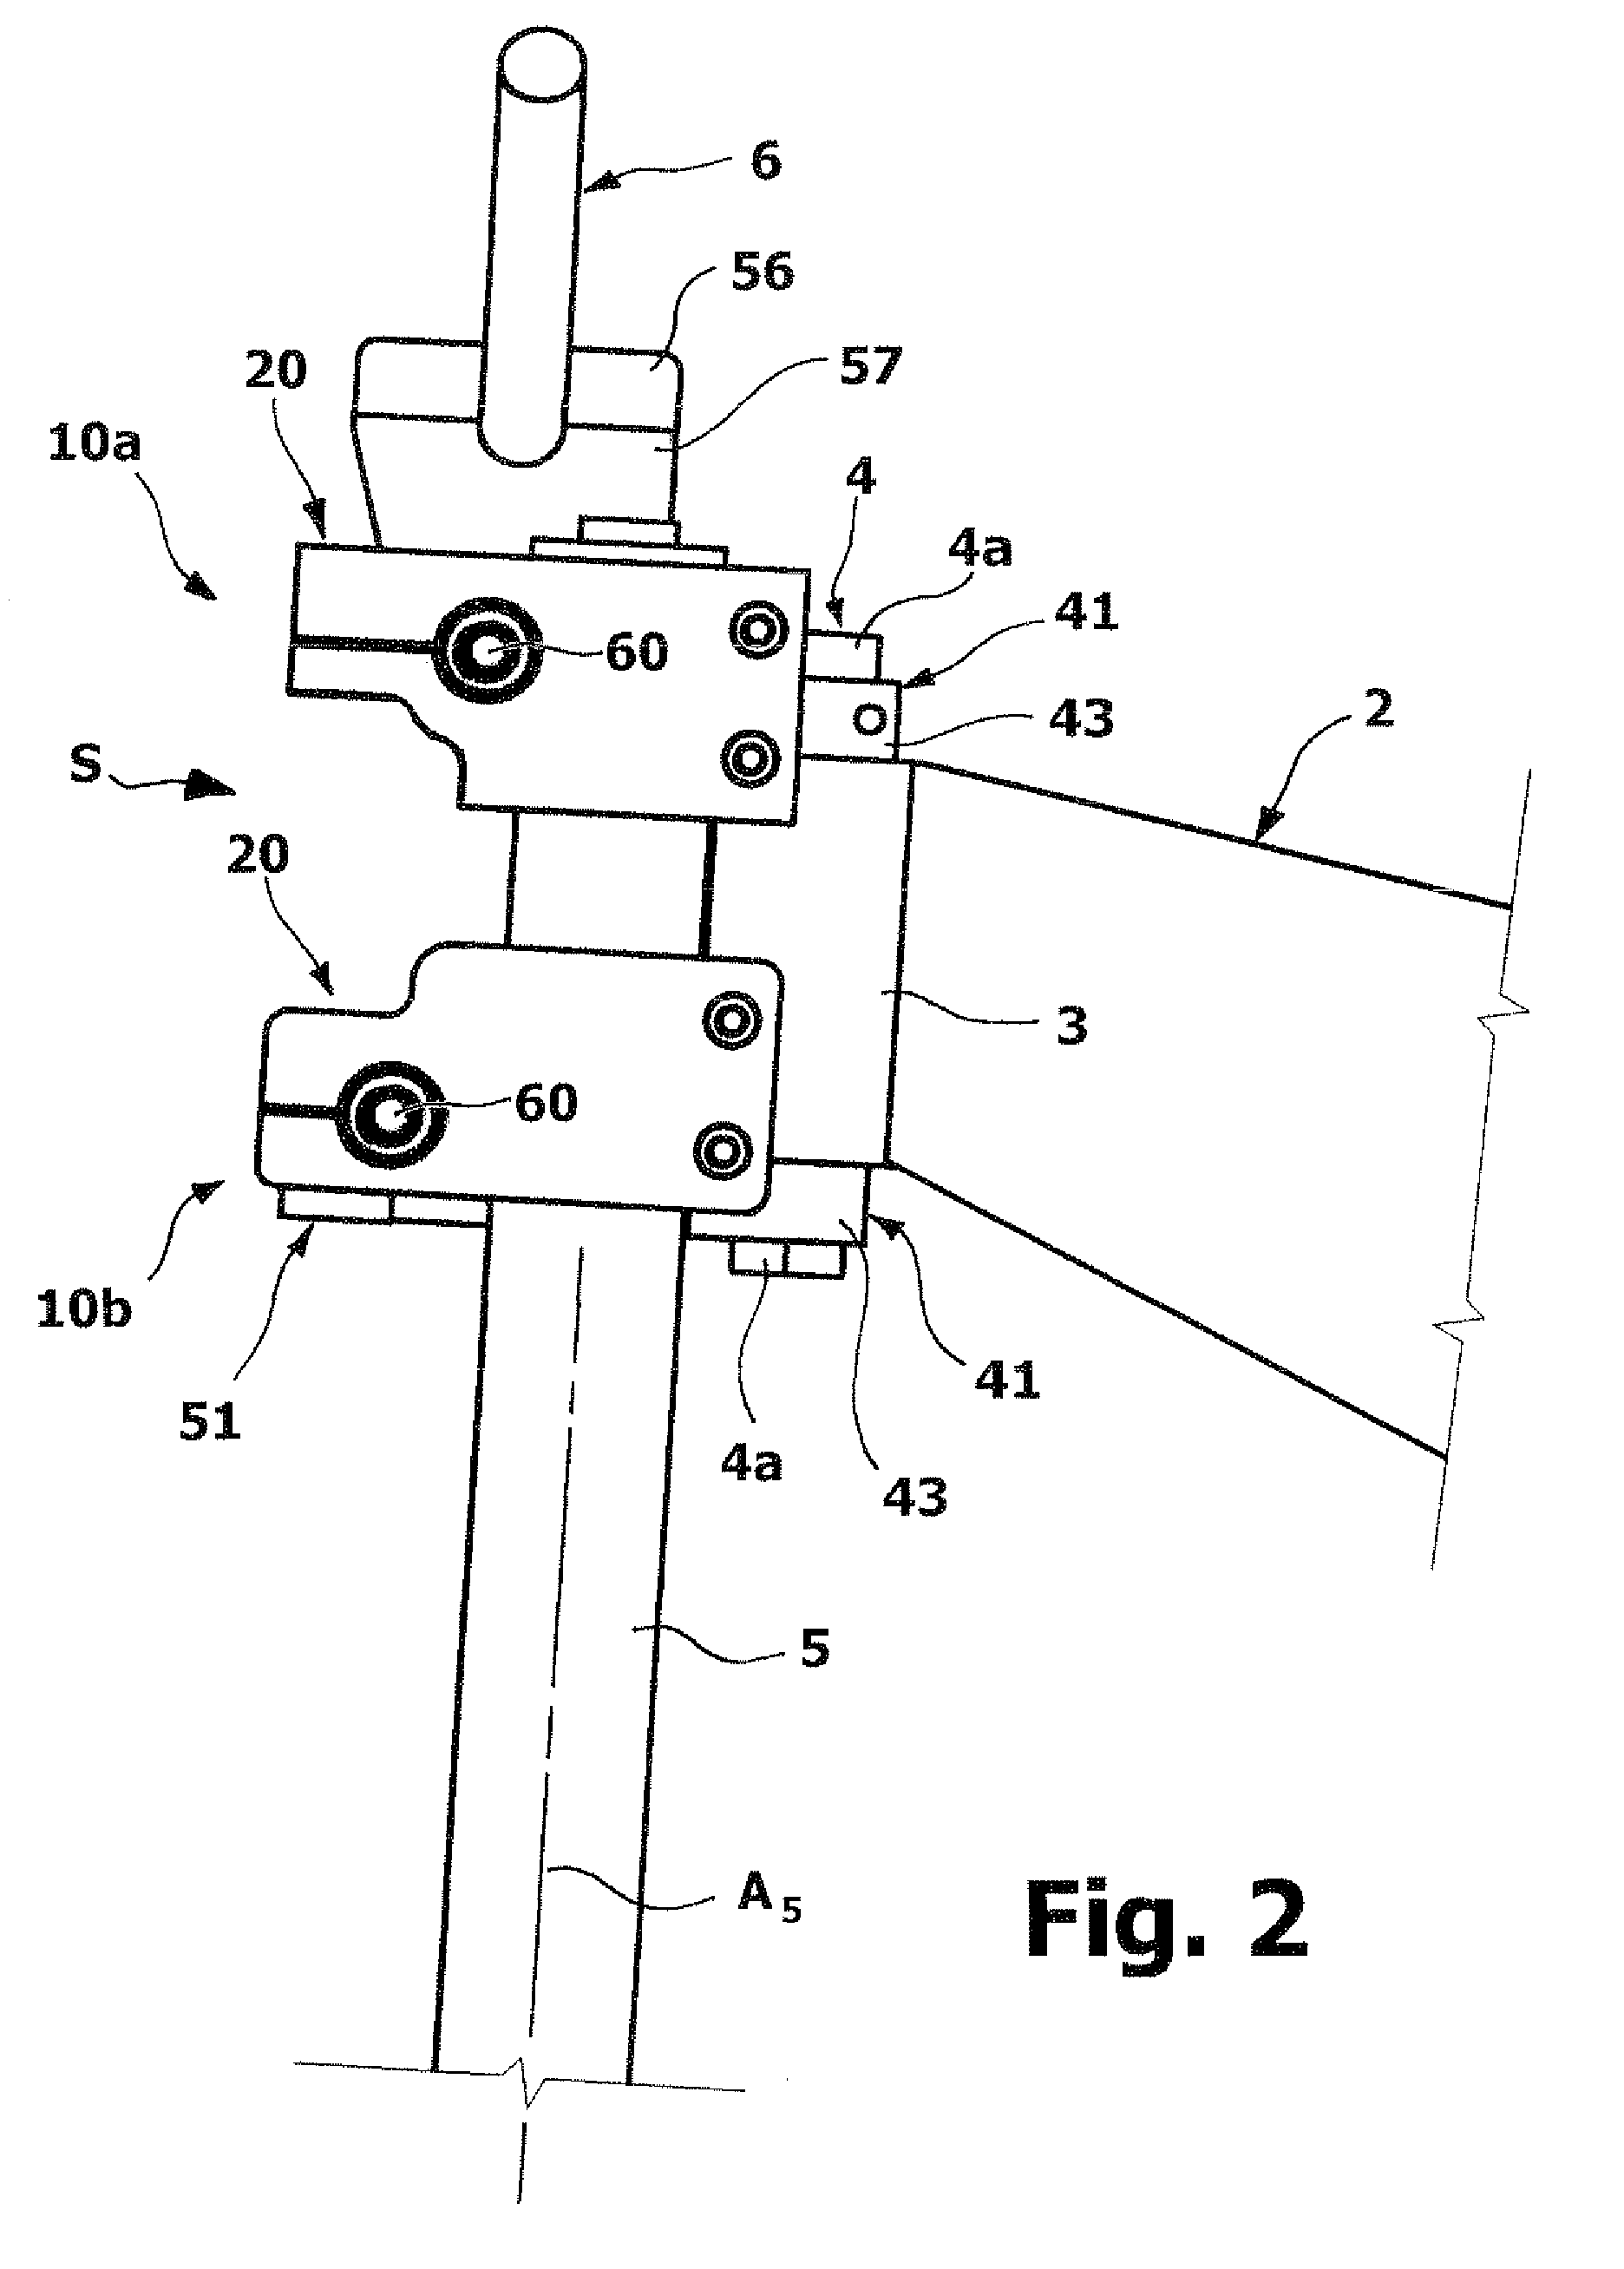 Device for adjusting inclination of a front fork of a vehicle having two or three wheels, particularly a cycle or a motorcycle